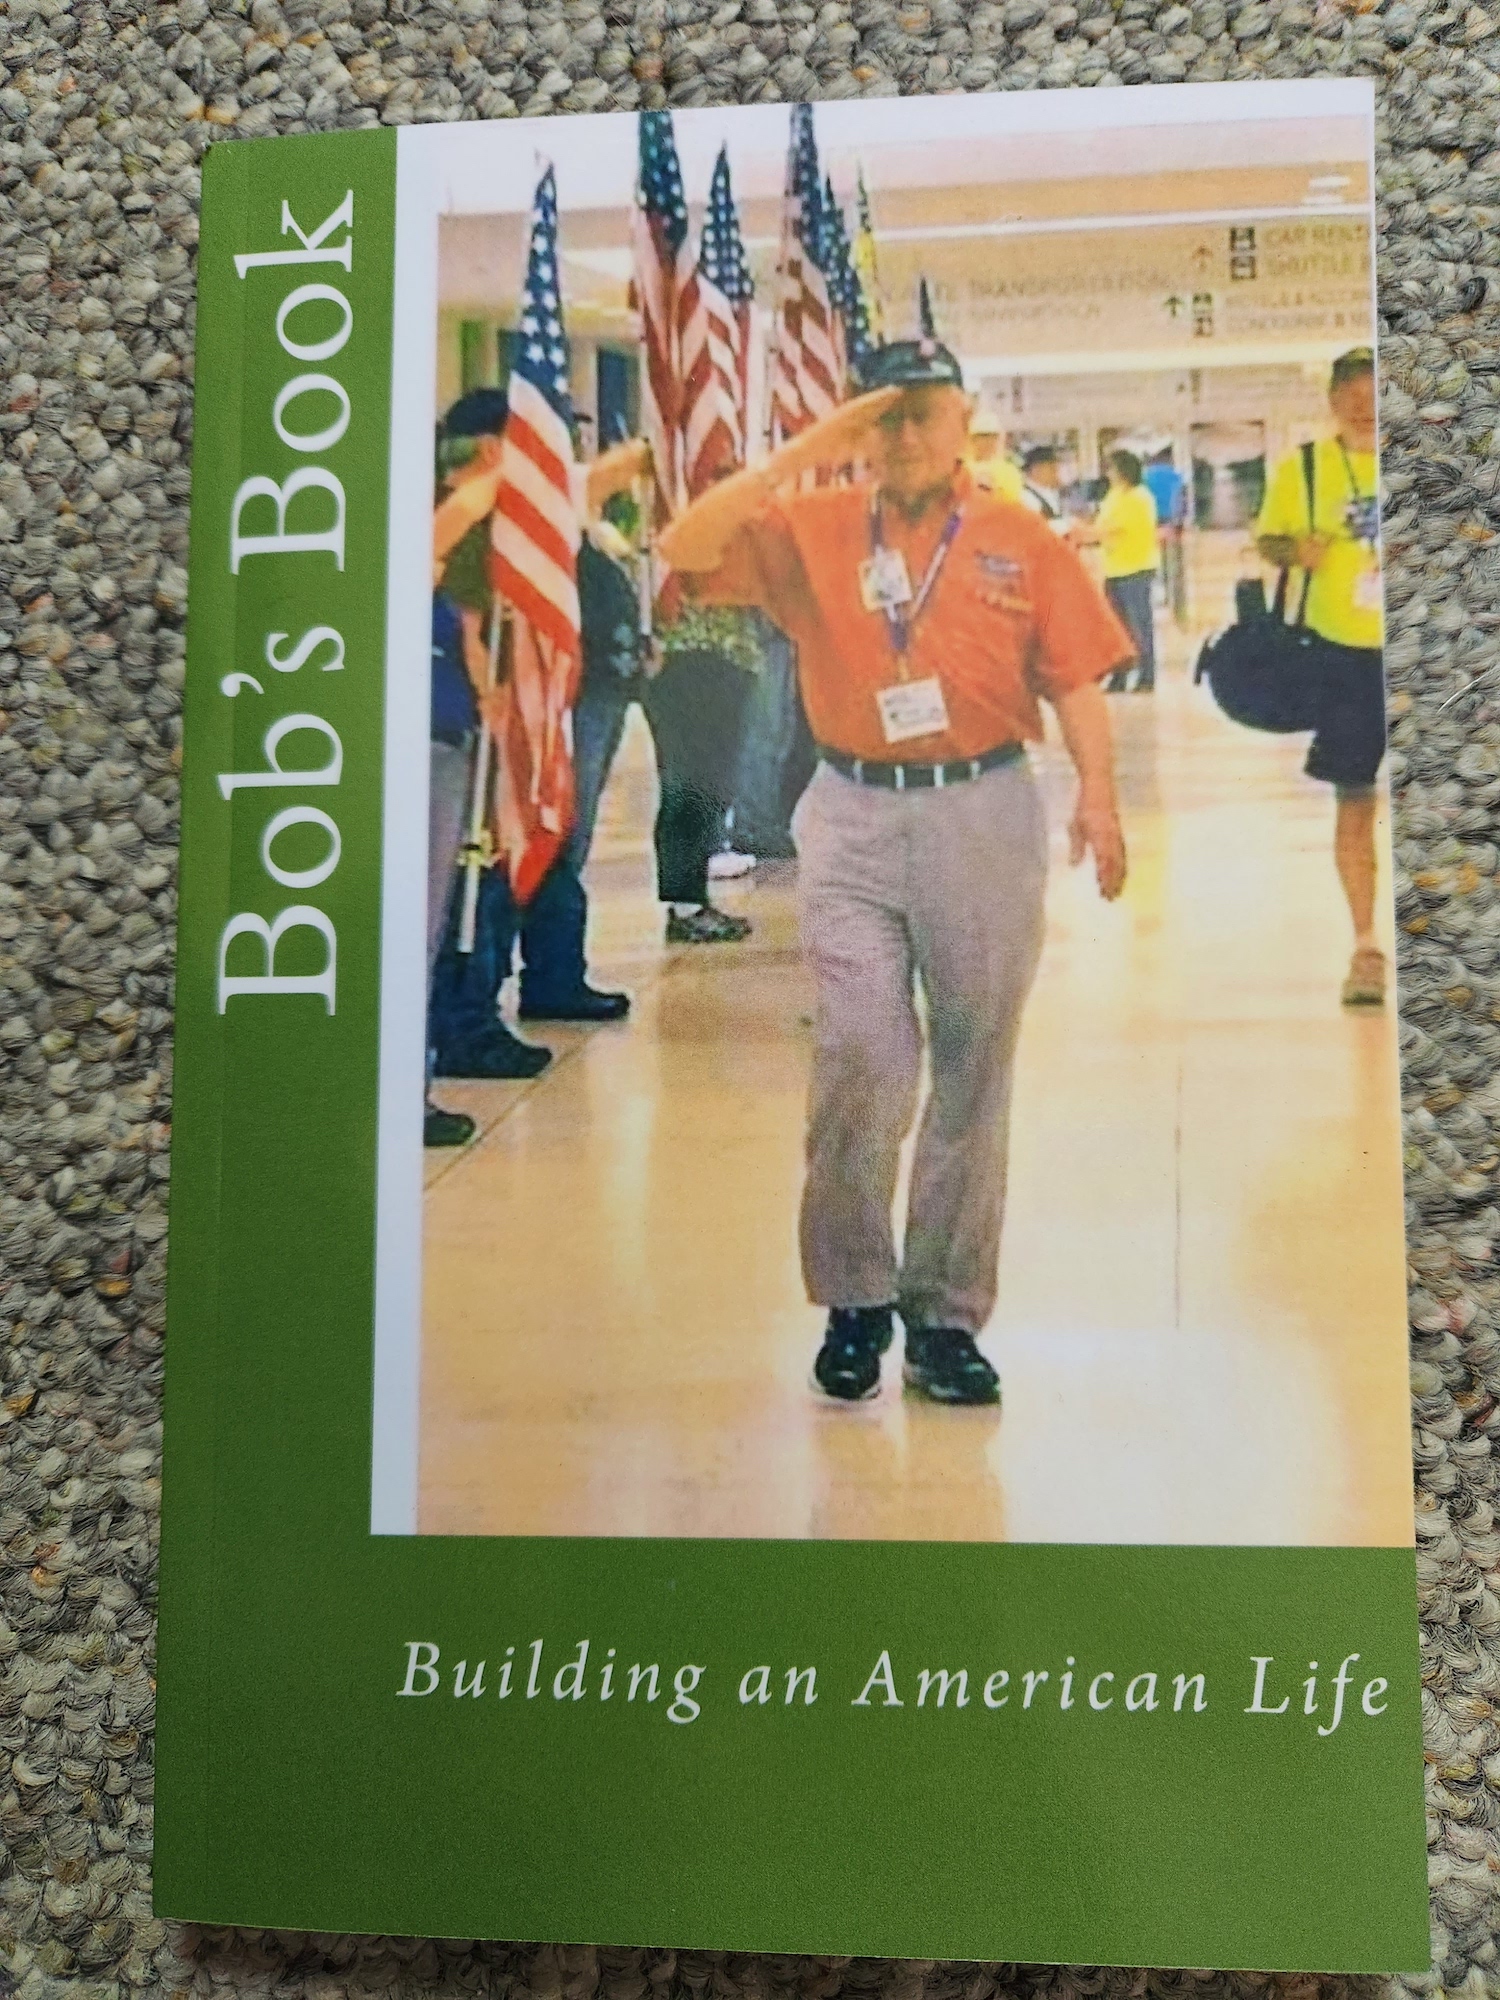 Picture of the front cover of Bob's book.